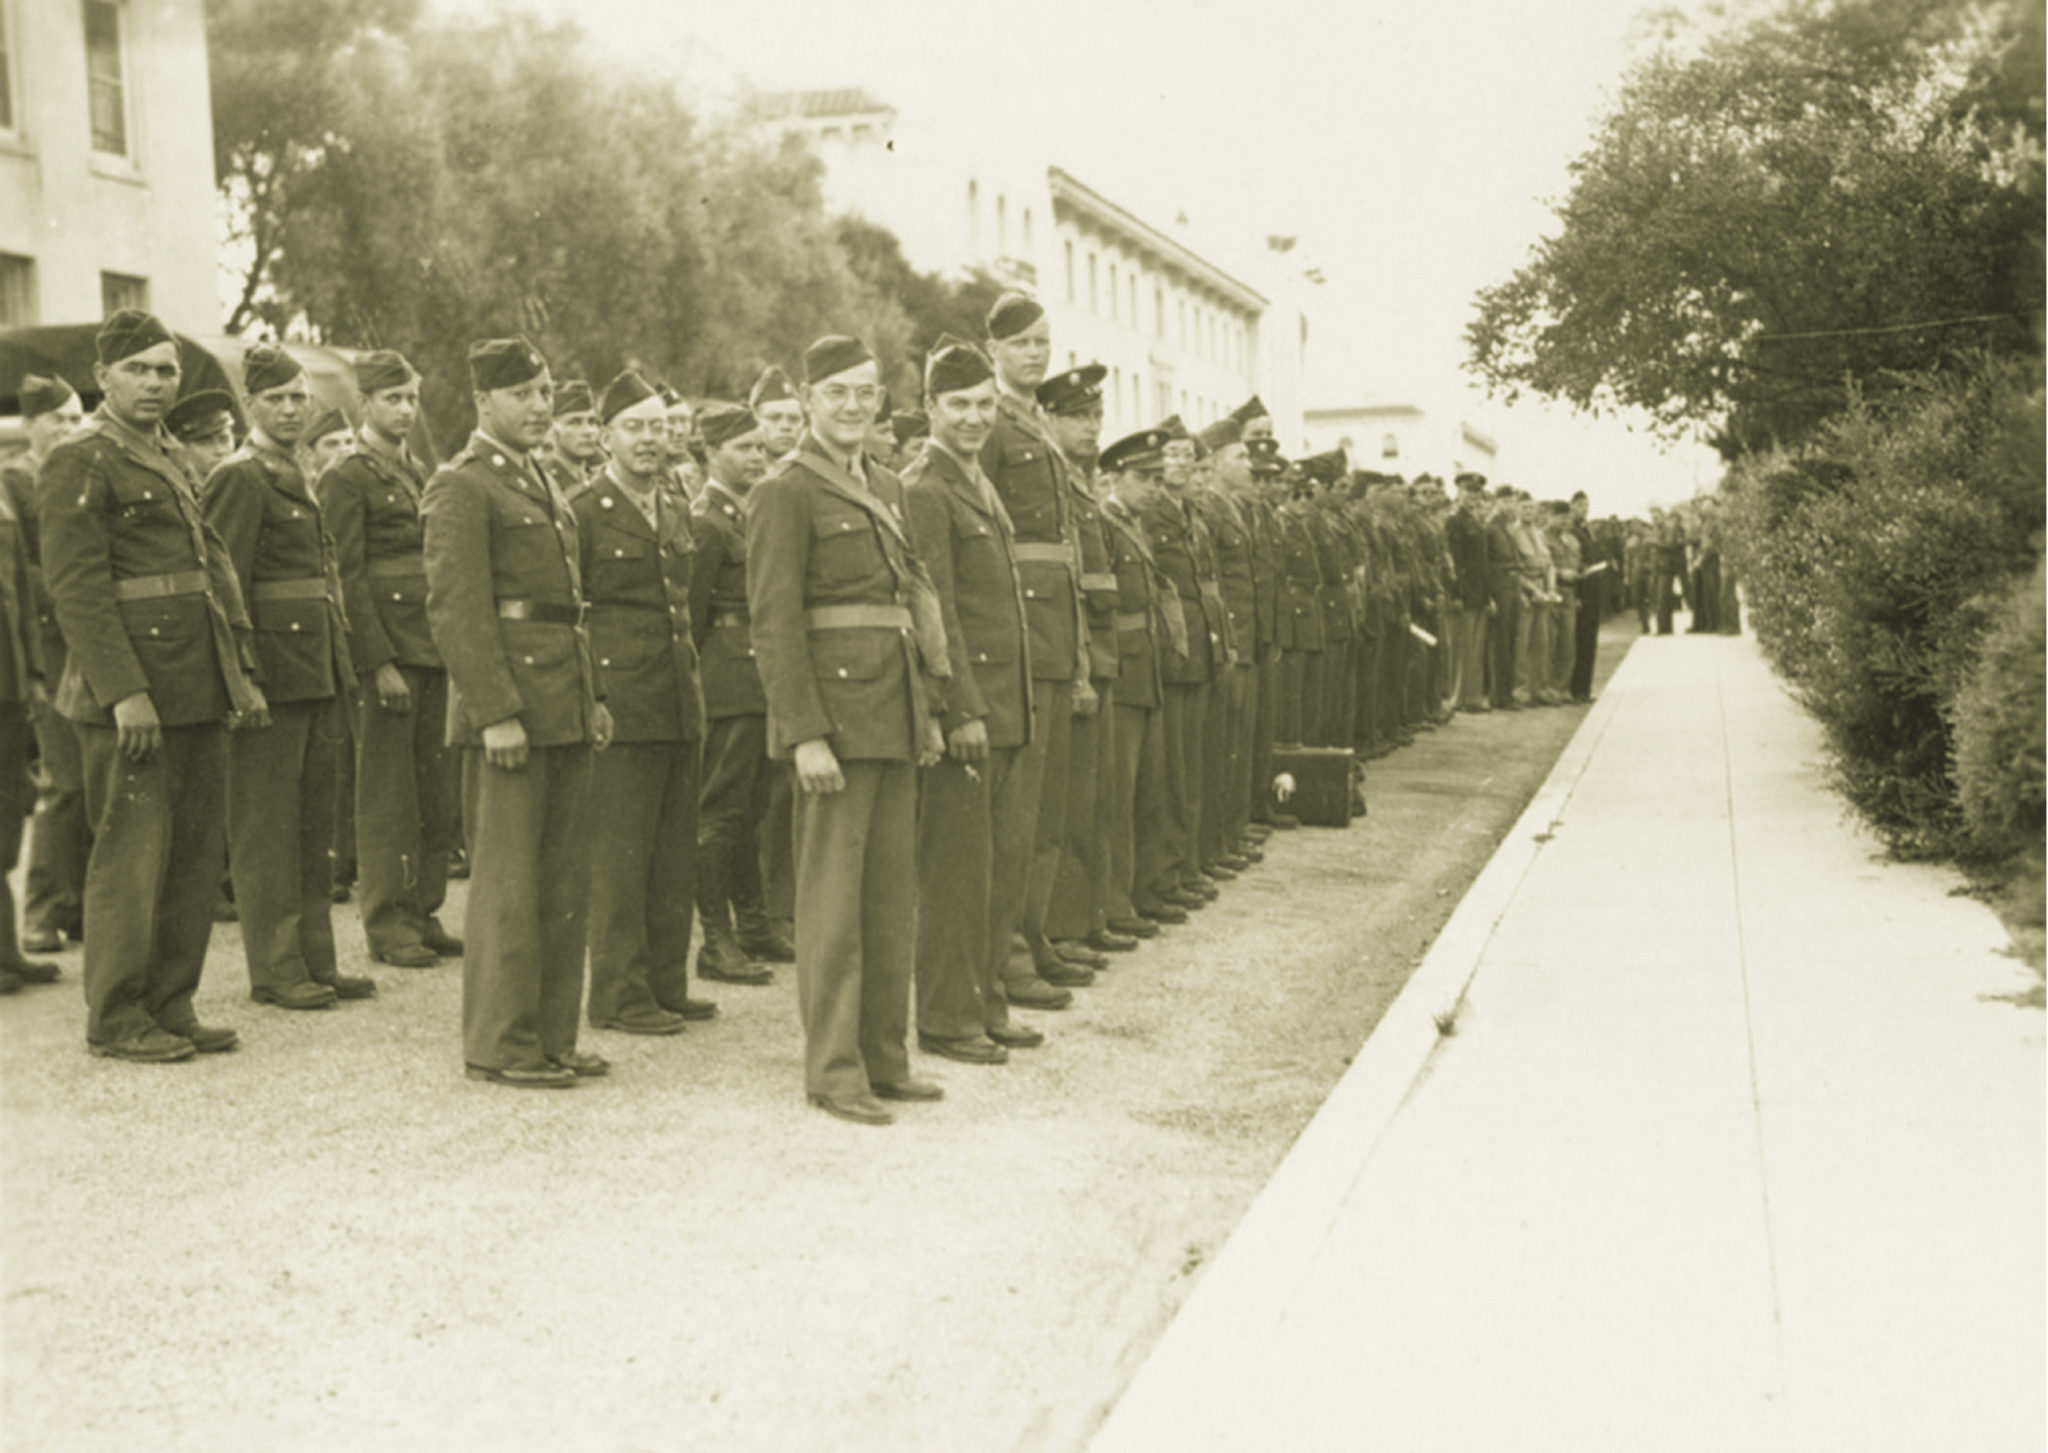 In formation, 1943: Santa Clara cadets in front of the Donohoe Infirmary (now Donohoe Alumni House). Kenna Hall and the Adobe Lodge were reserved exclusively for military science instruction.The following year, 75 percent of the campus was being used to train soldiers. Photo from SCU Archives.